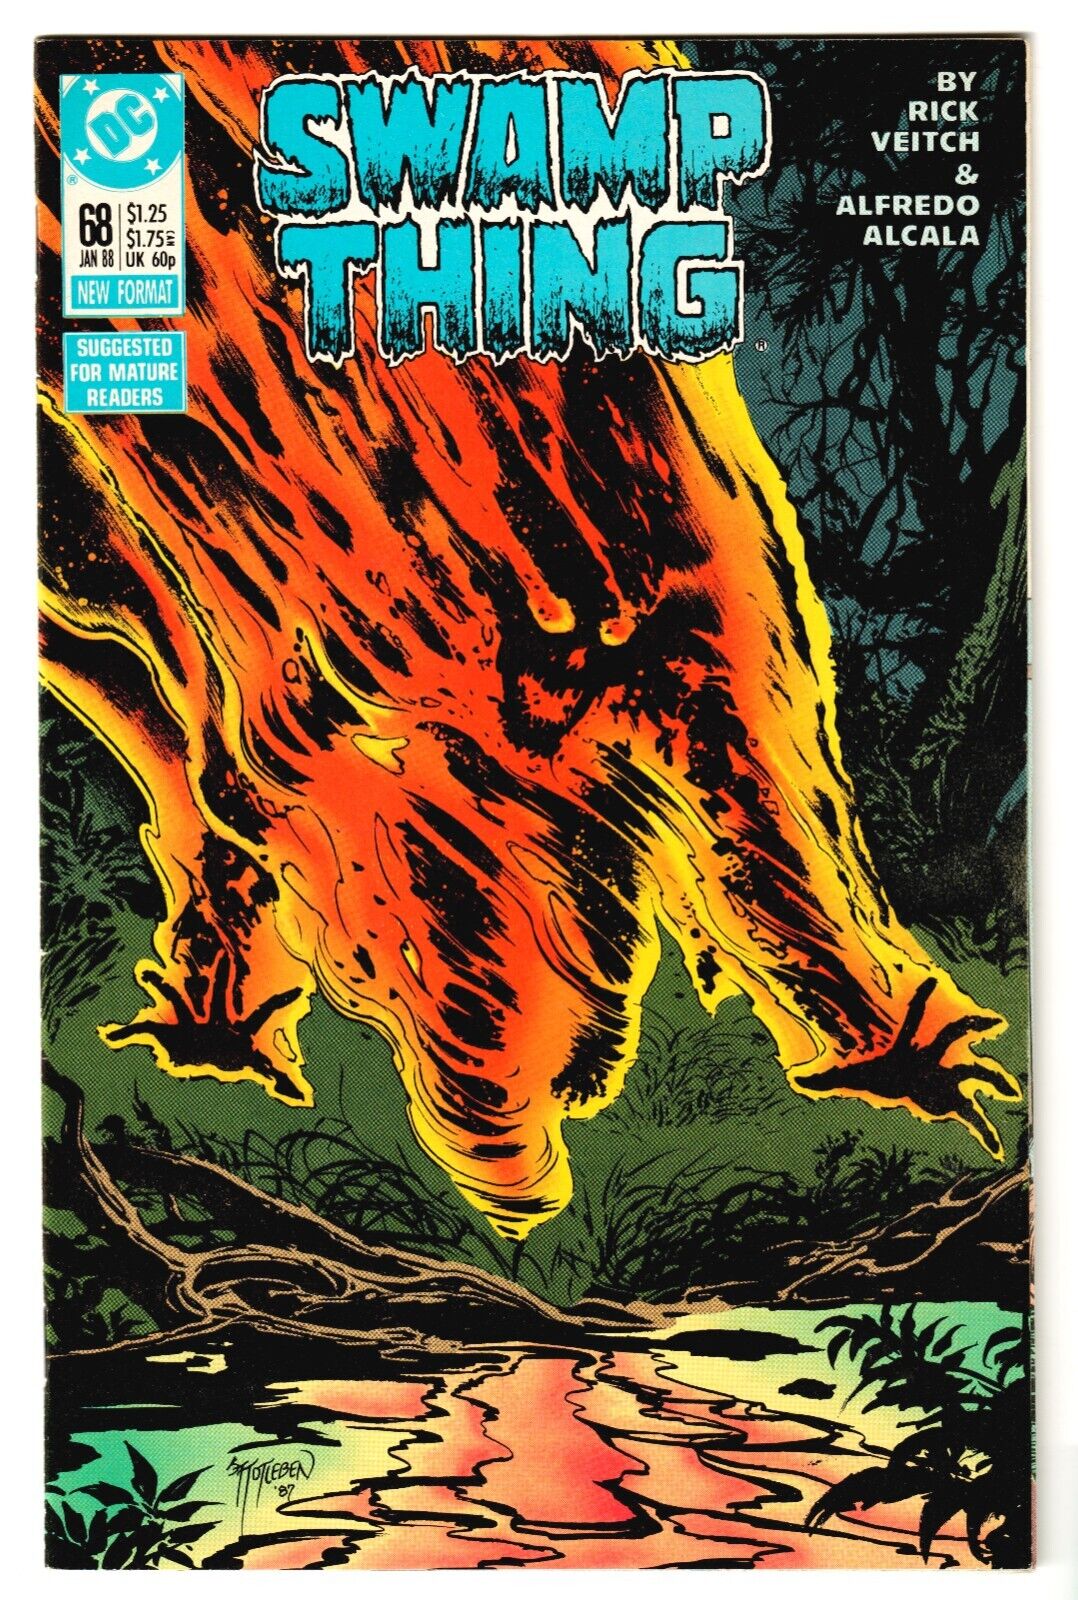 SWAMP THING #68 (Vintage 1988 DC Comics) GREAT CONDITION VF/NM WHITE PAGES